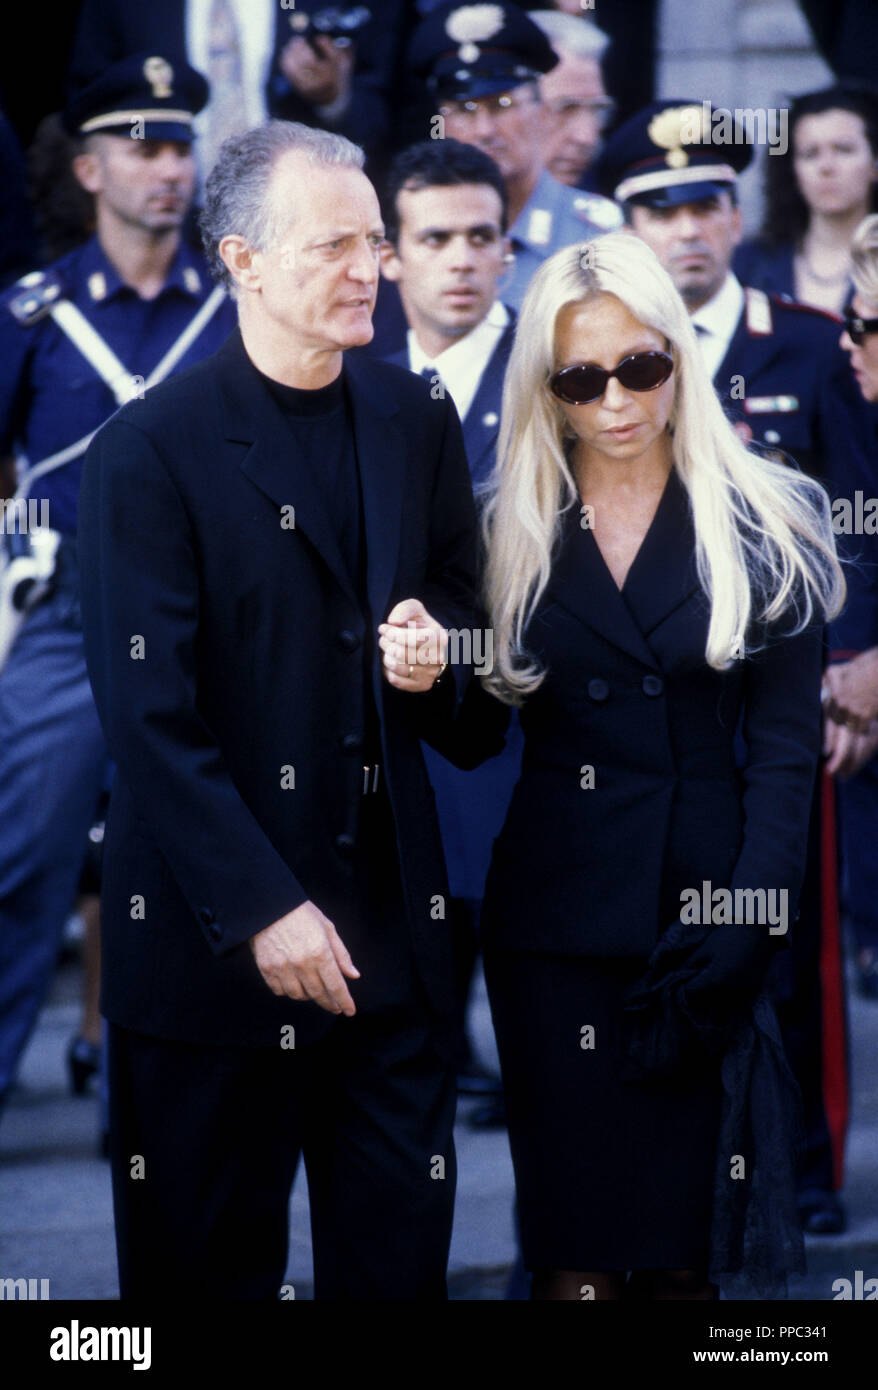 Santo And Donatella Versace At The Funeral Of Gianni 1997 Stock Photo -  Alamy